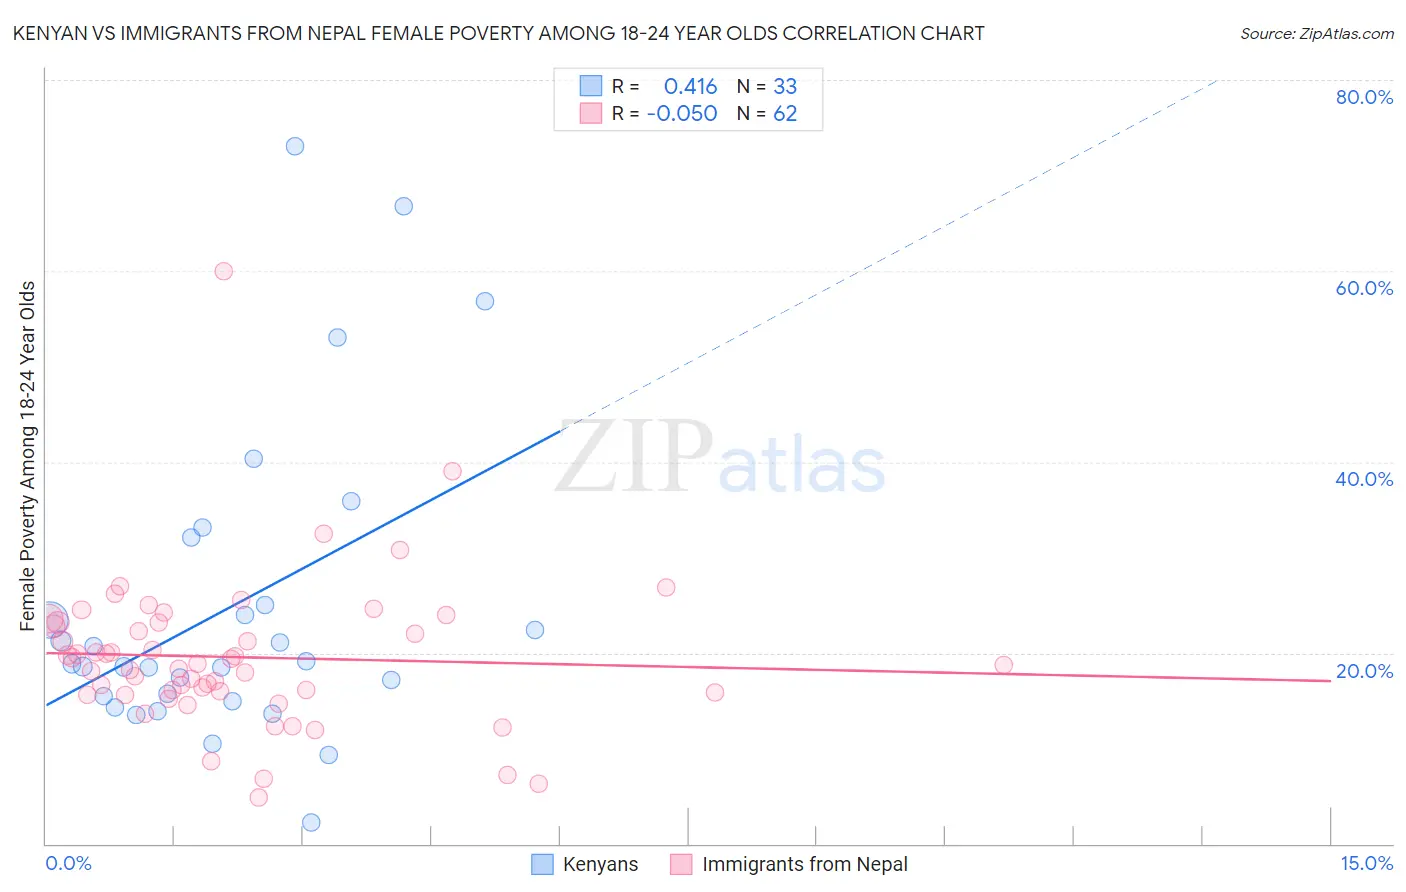 Kenyan vs Immigrants from Nepal Female Poverty Among 18-24 Year Olds